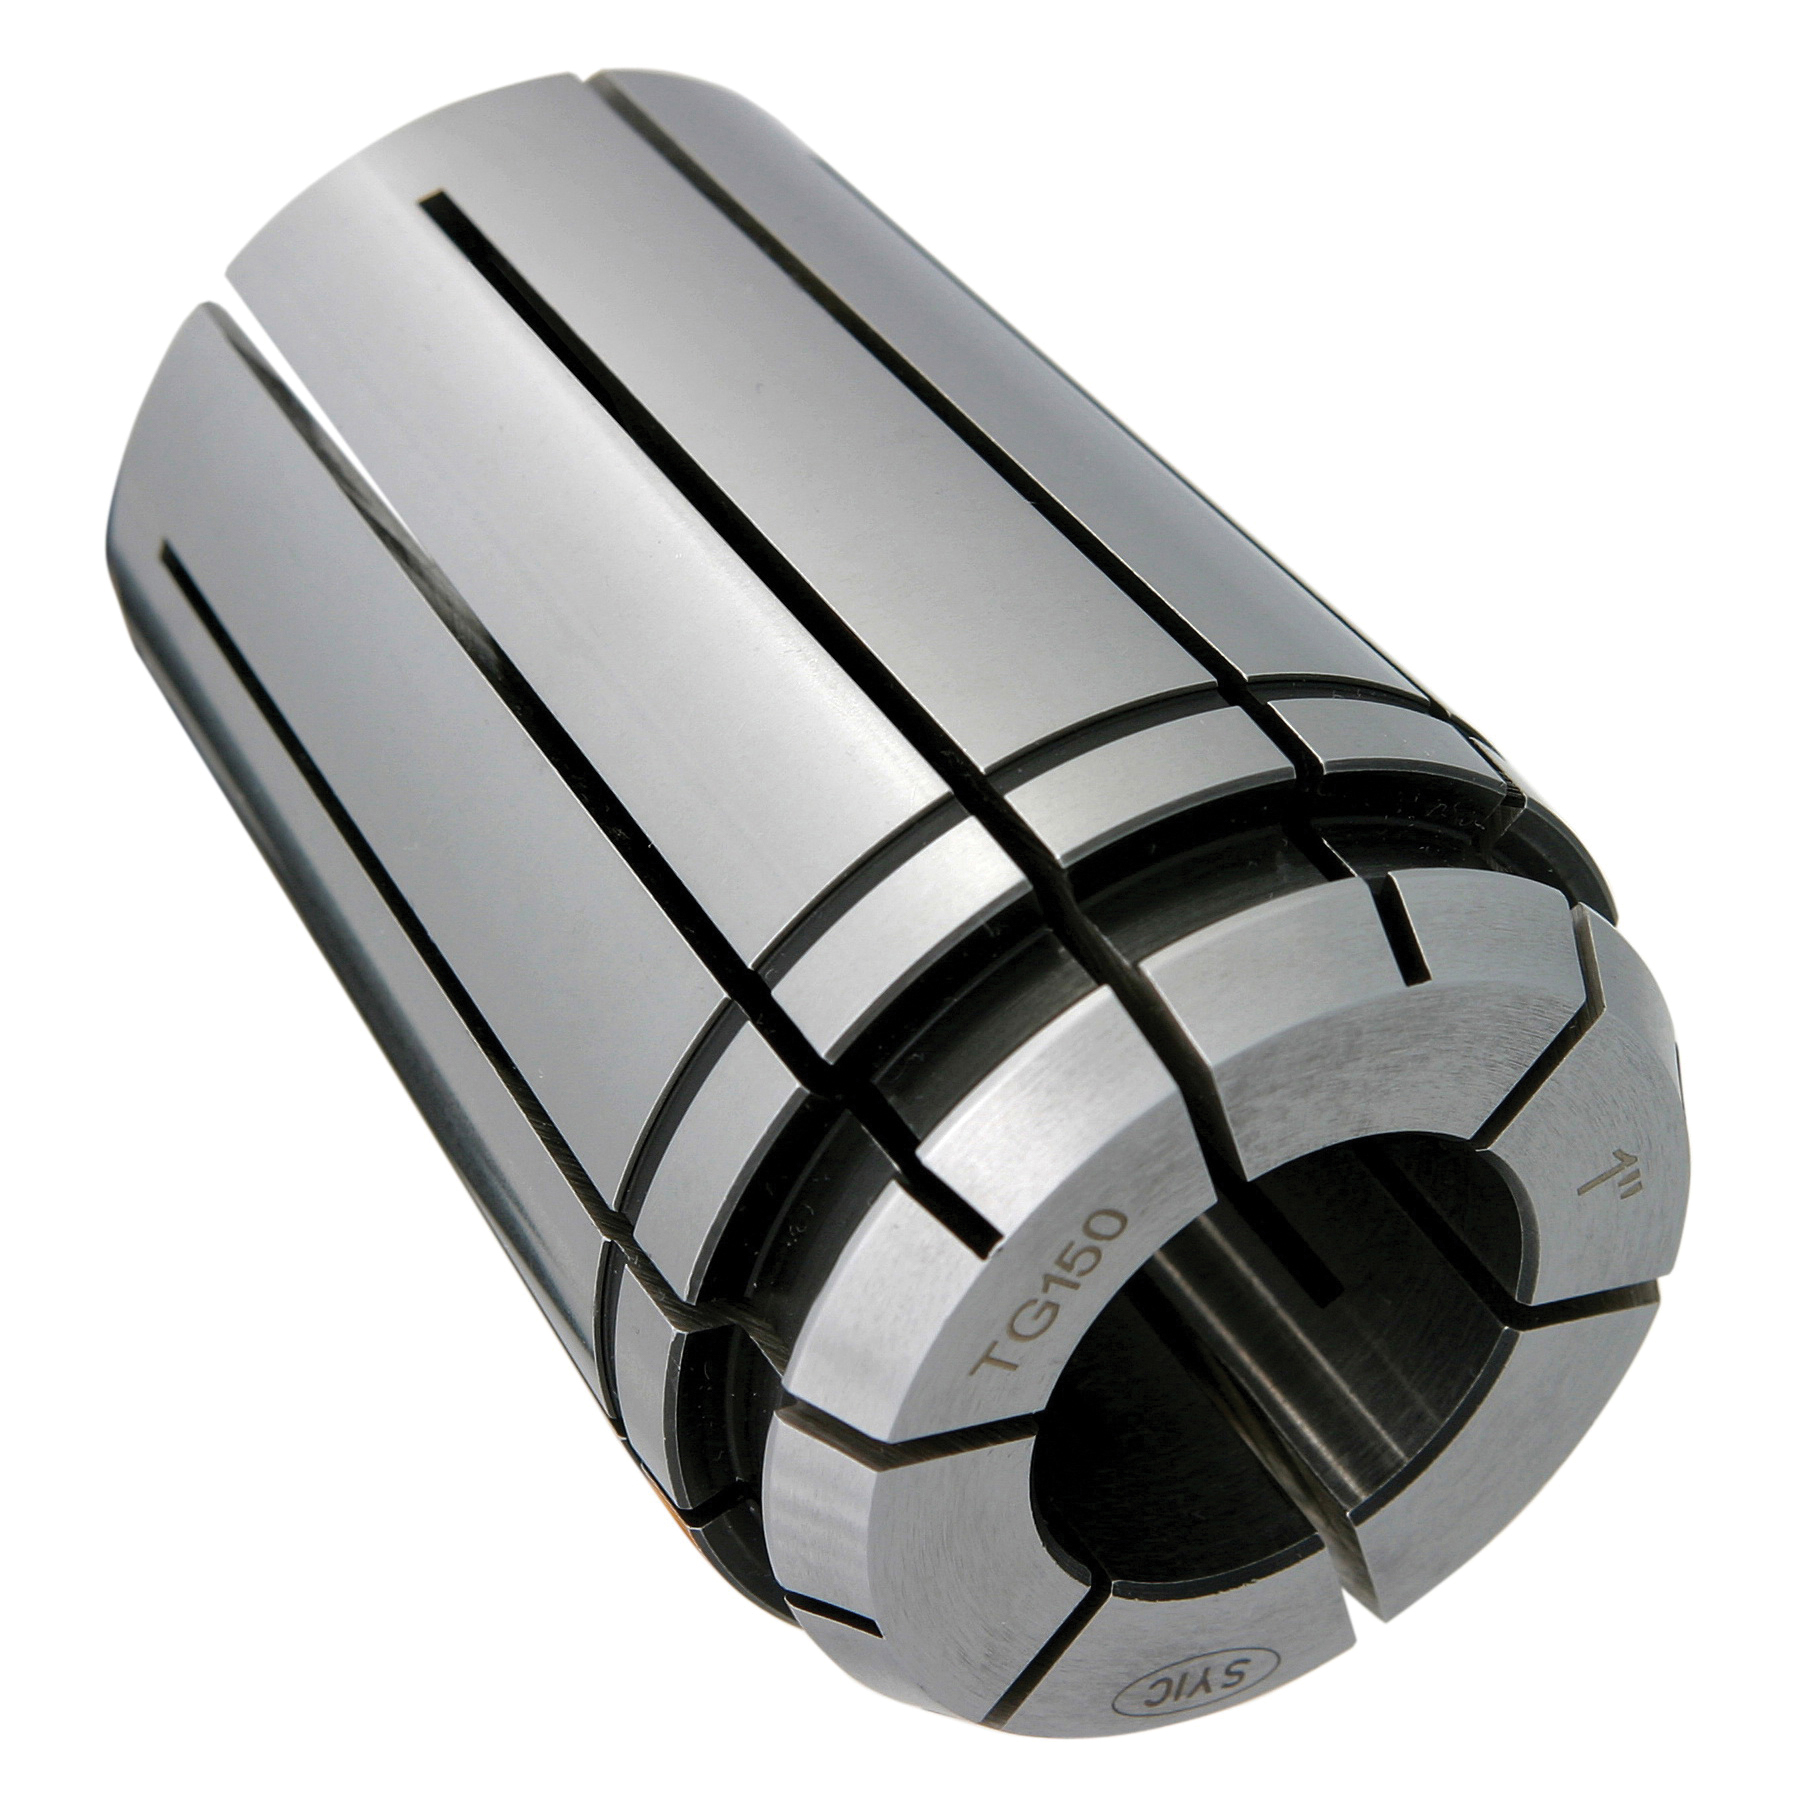 TG150 1-3/64" COLLET